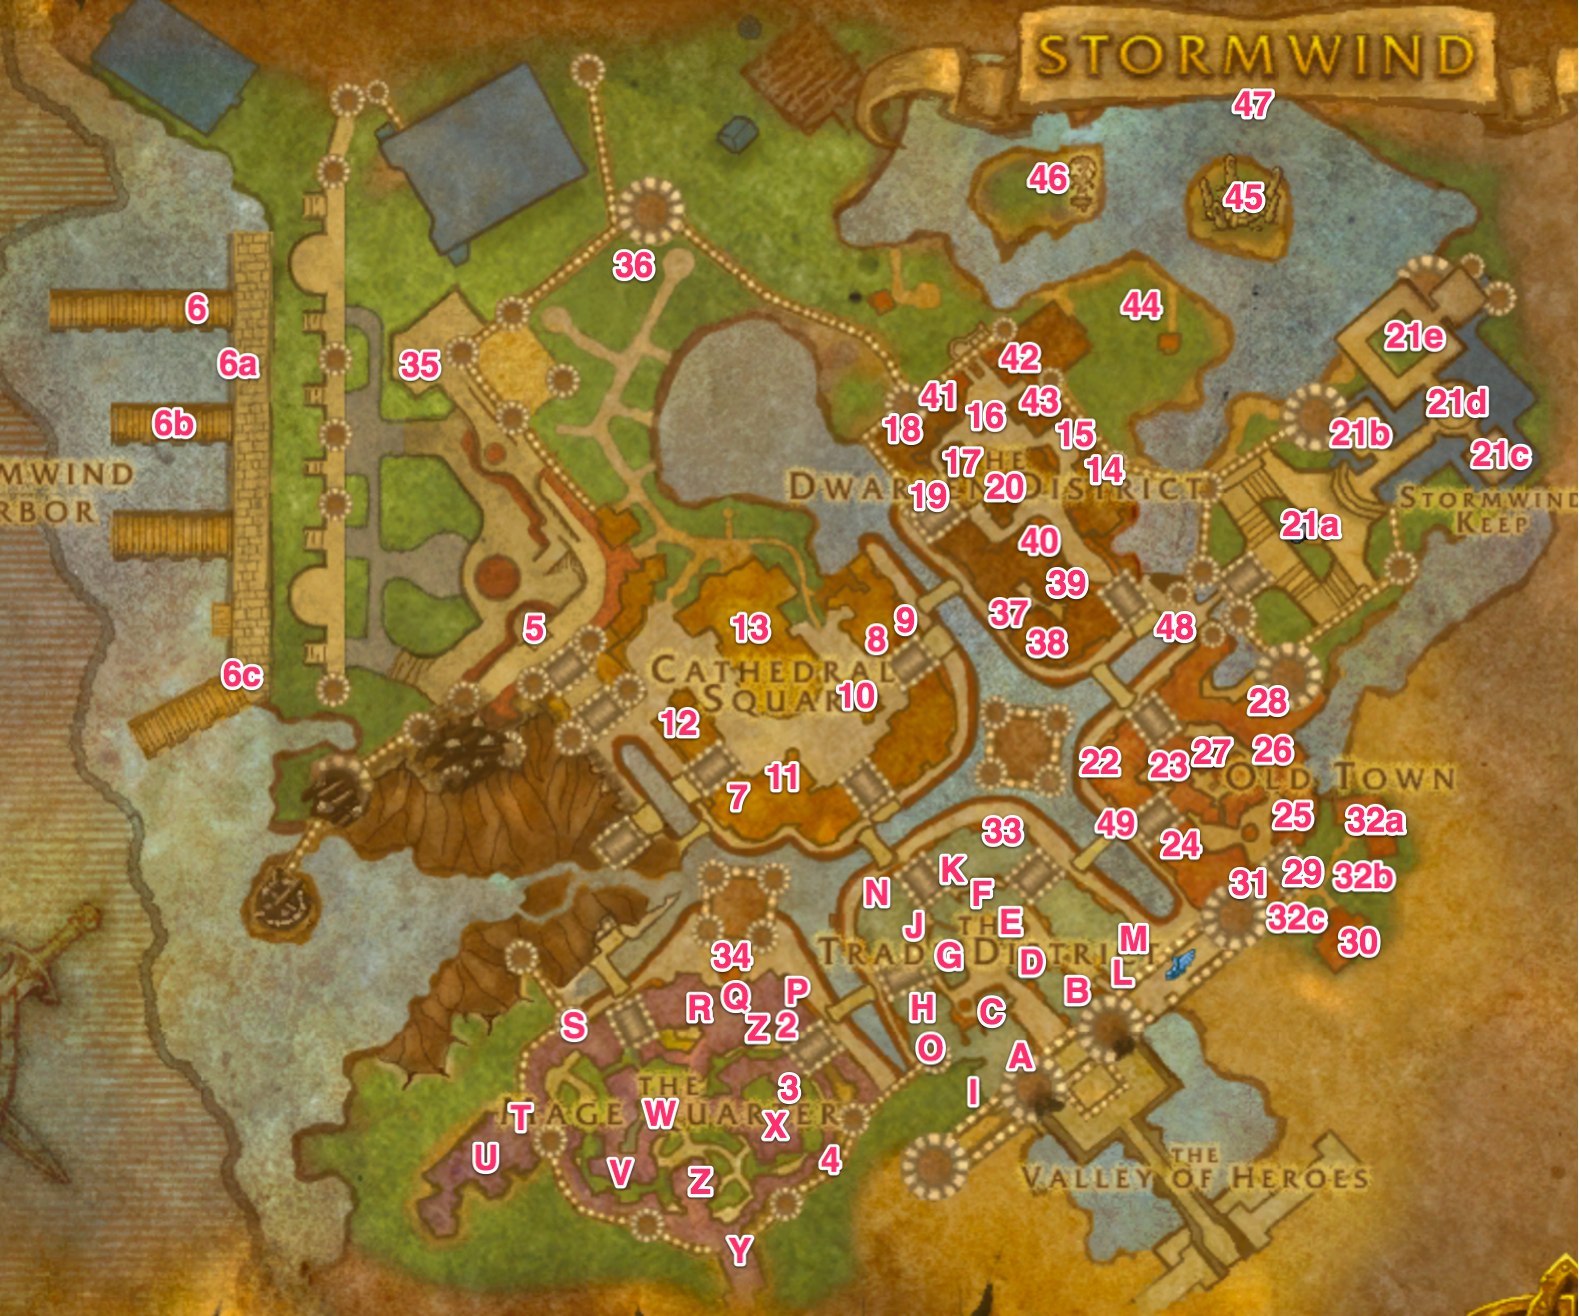 the stormwind portal to pandaria go to number 46 on the map below